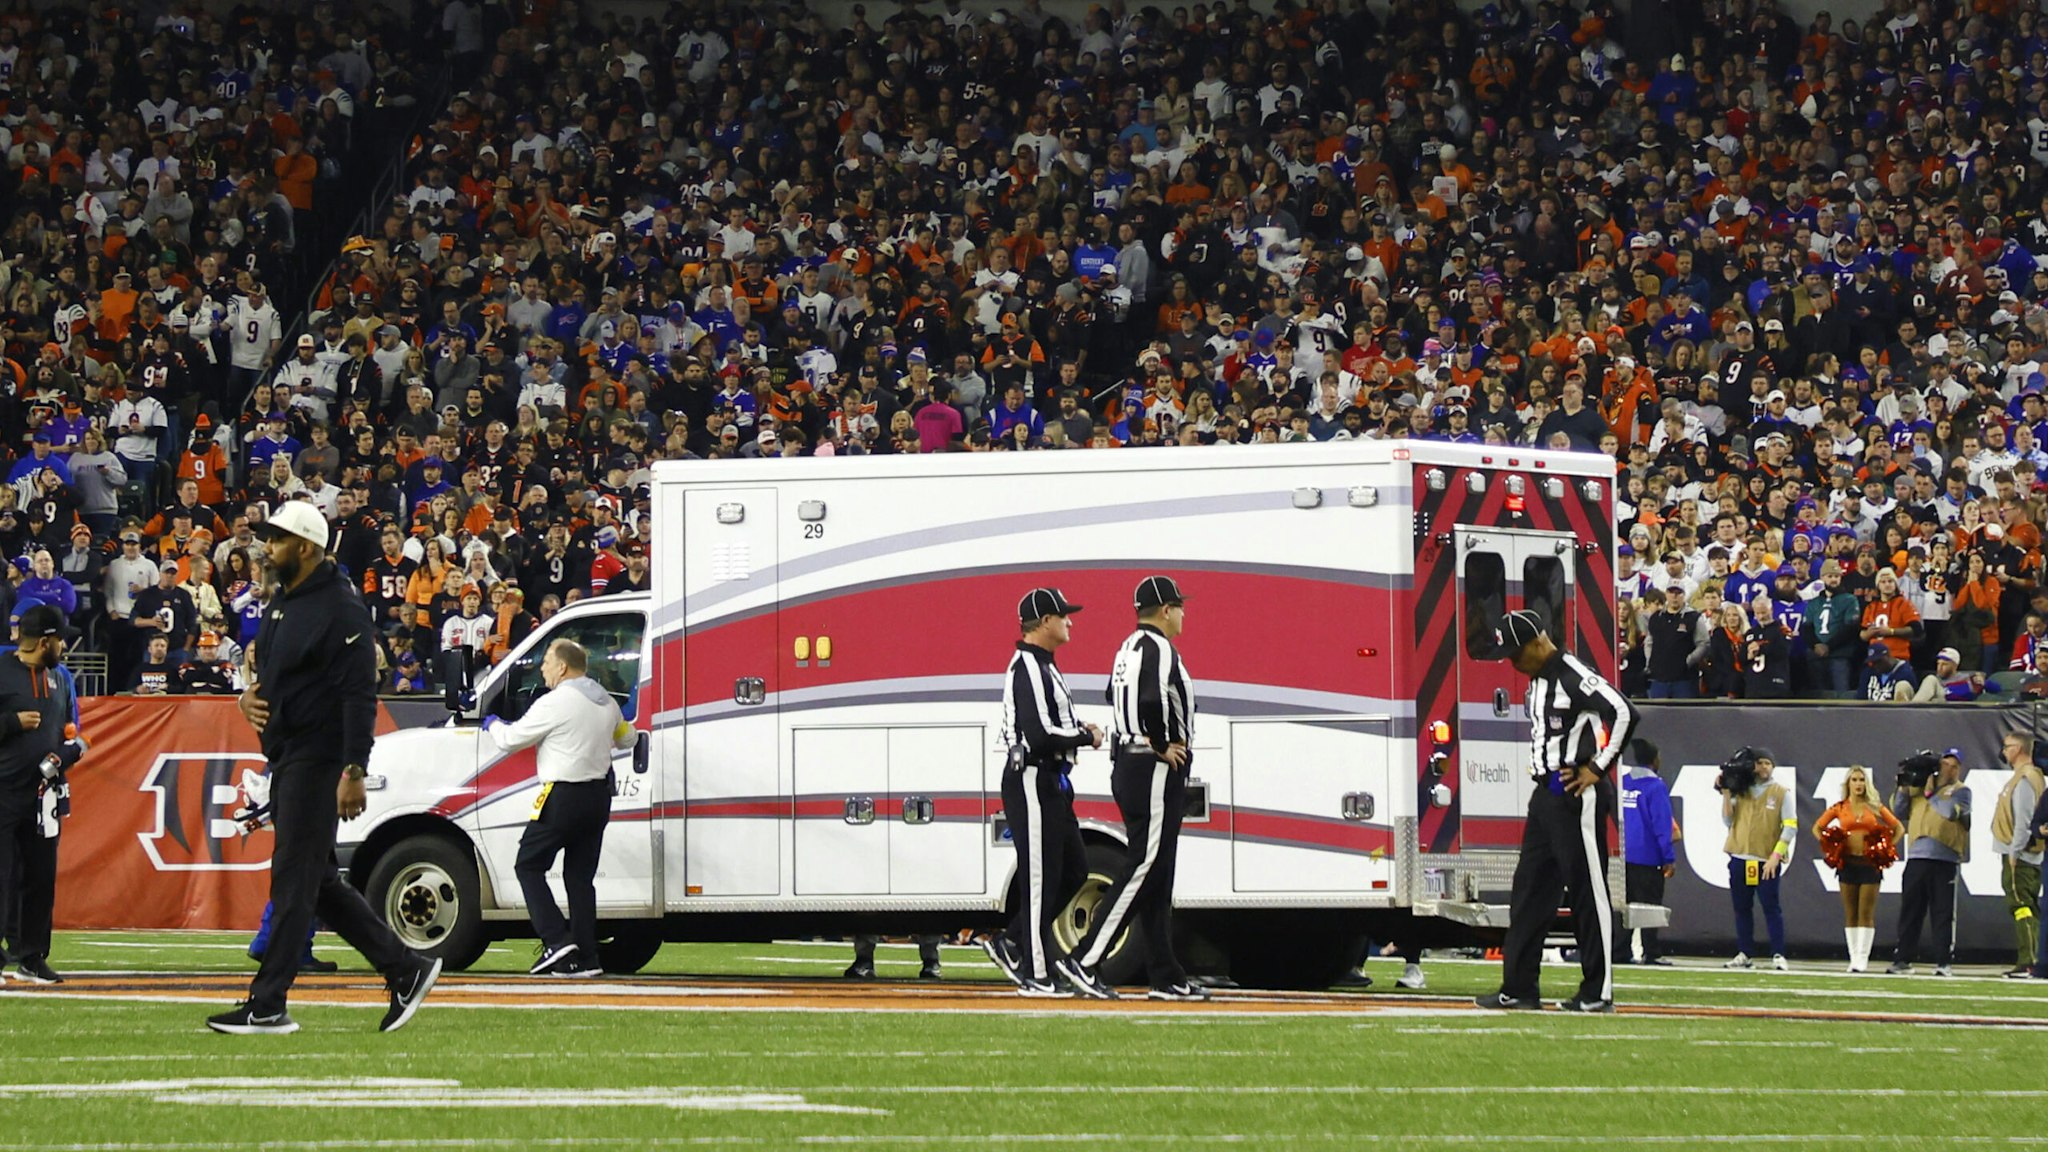 CINCINNATI, OHIO - JANUARY 02: Fans look on as the ambulance leaves carrying Damar Hamlin #3 of the Buffalo Bills after he collapsed after making a tackle against the Cincinnati Bengals during the first quarter at Paycor Stadium on January 02, 2023 in Cincinnati, Ohio.